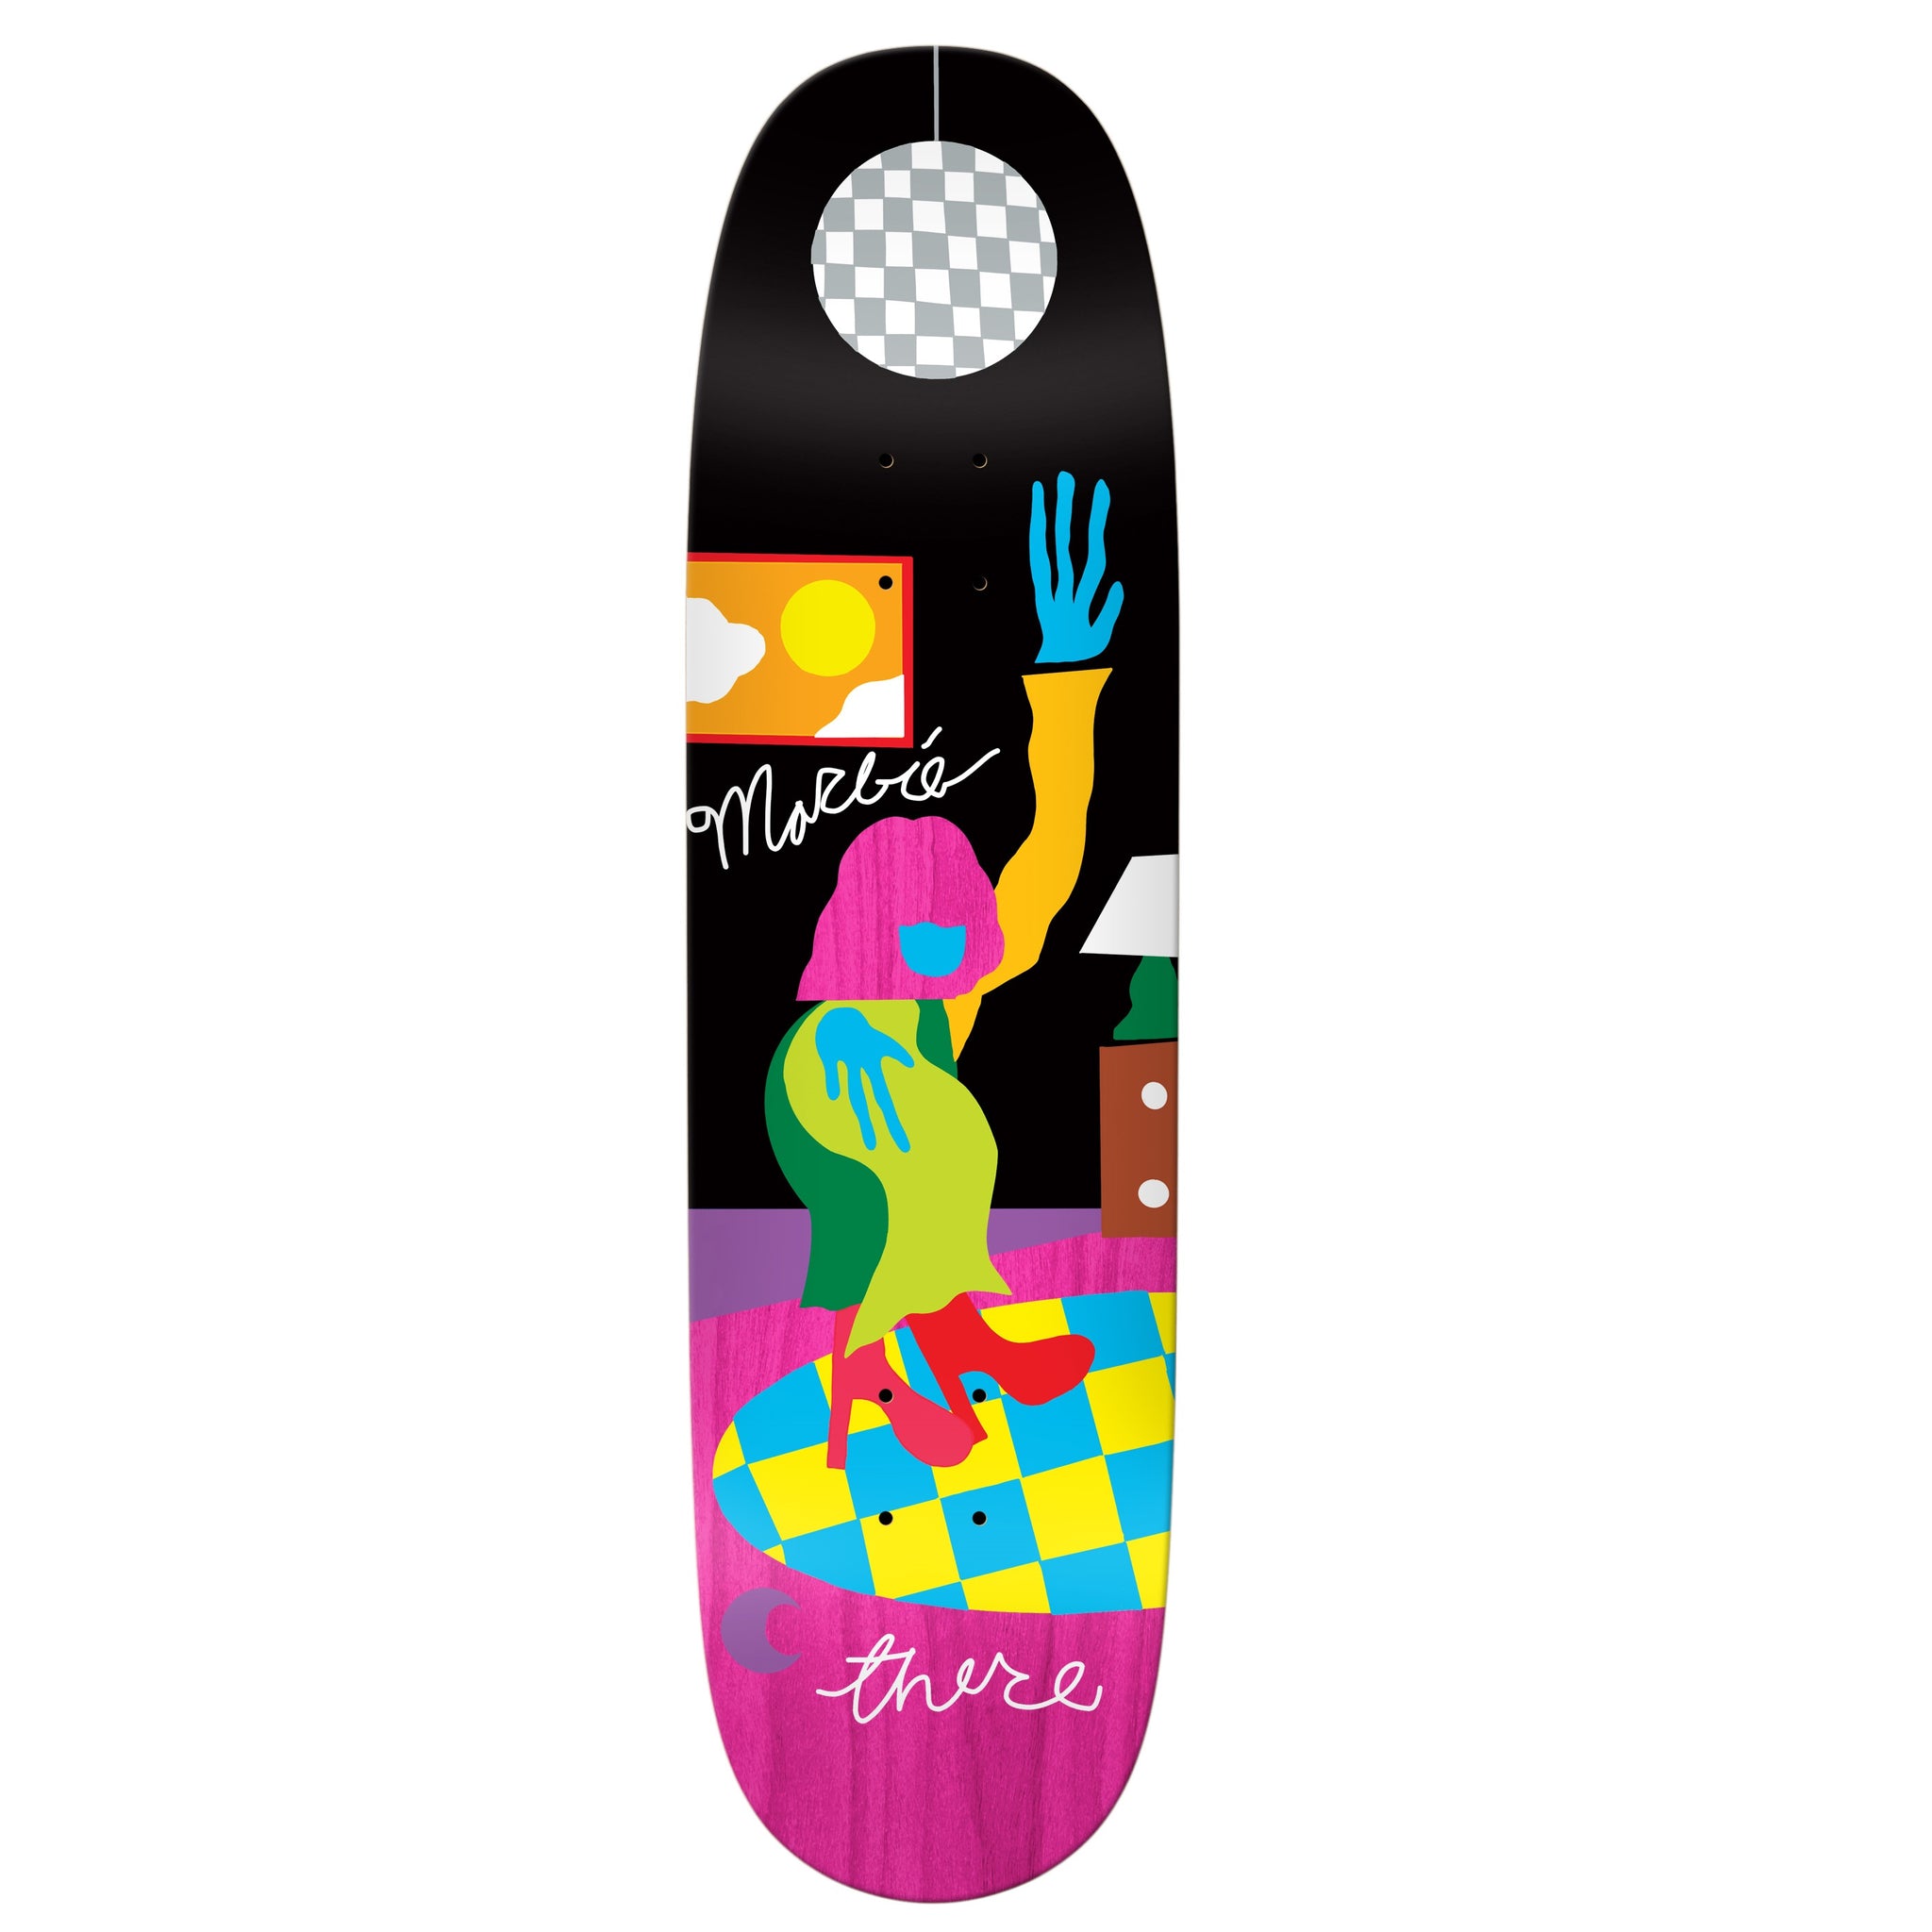 There Skateboards "Marbie Miller- Dancing by myself" 8.5" Deck